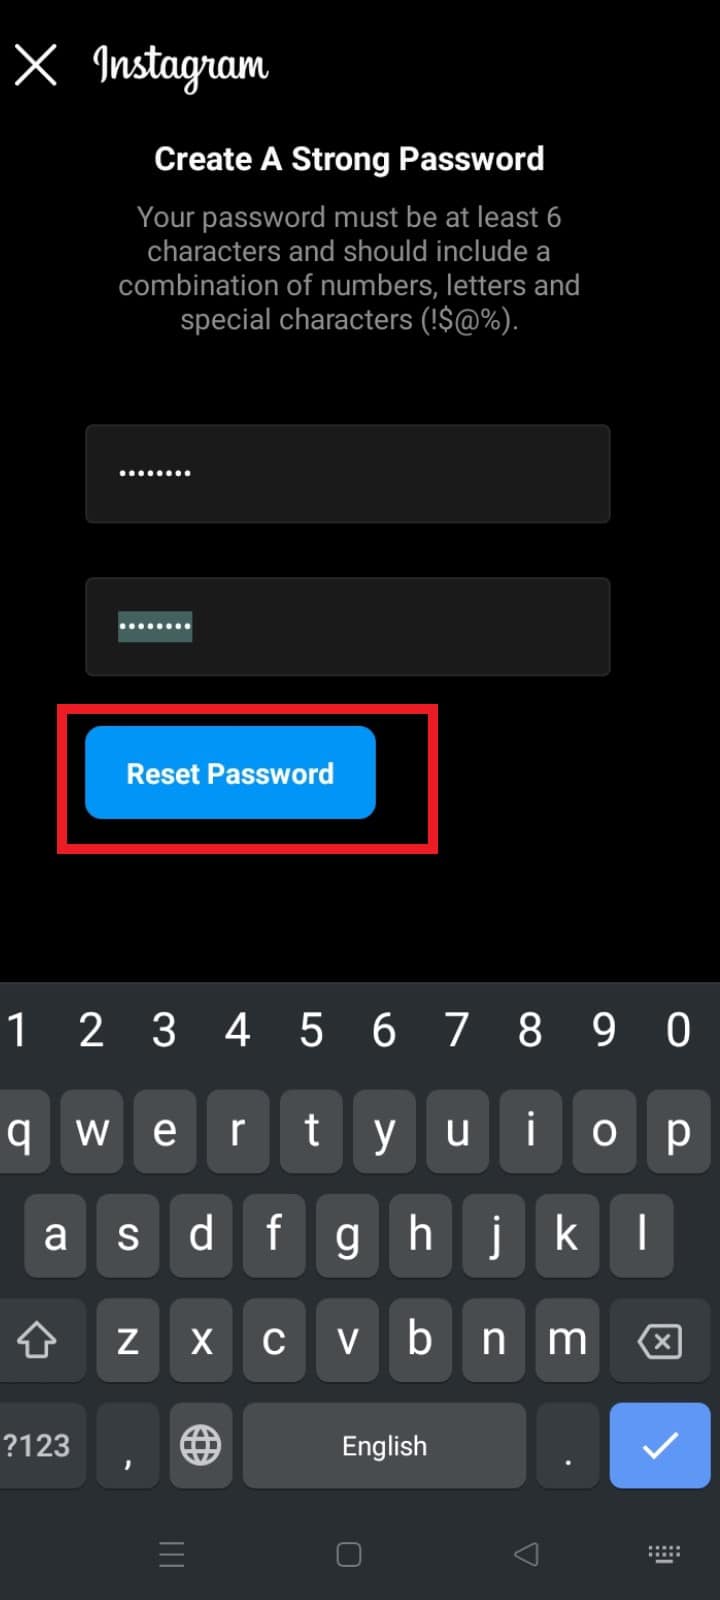 tap on Reset Password to finish the process.